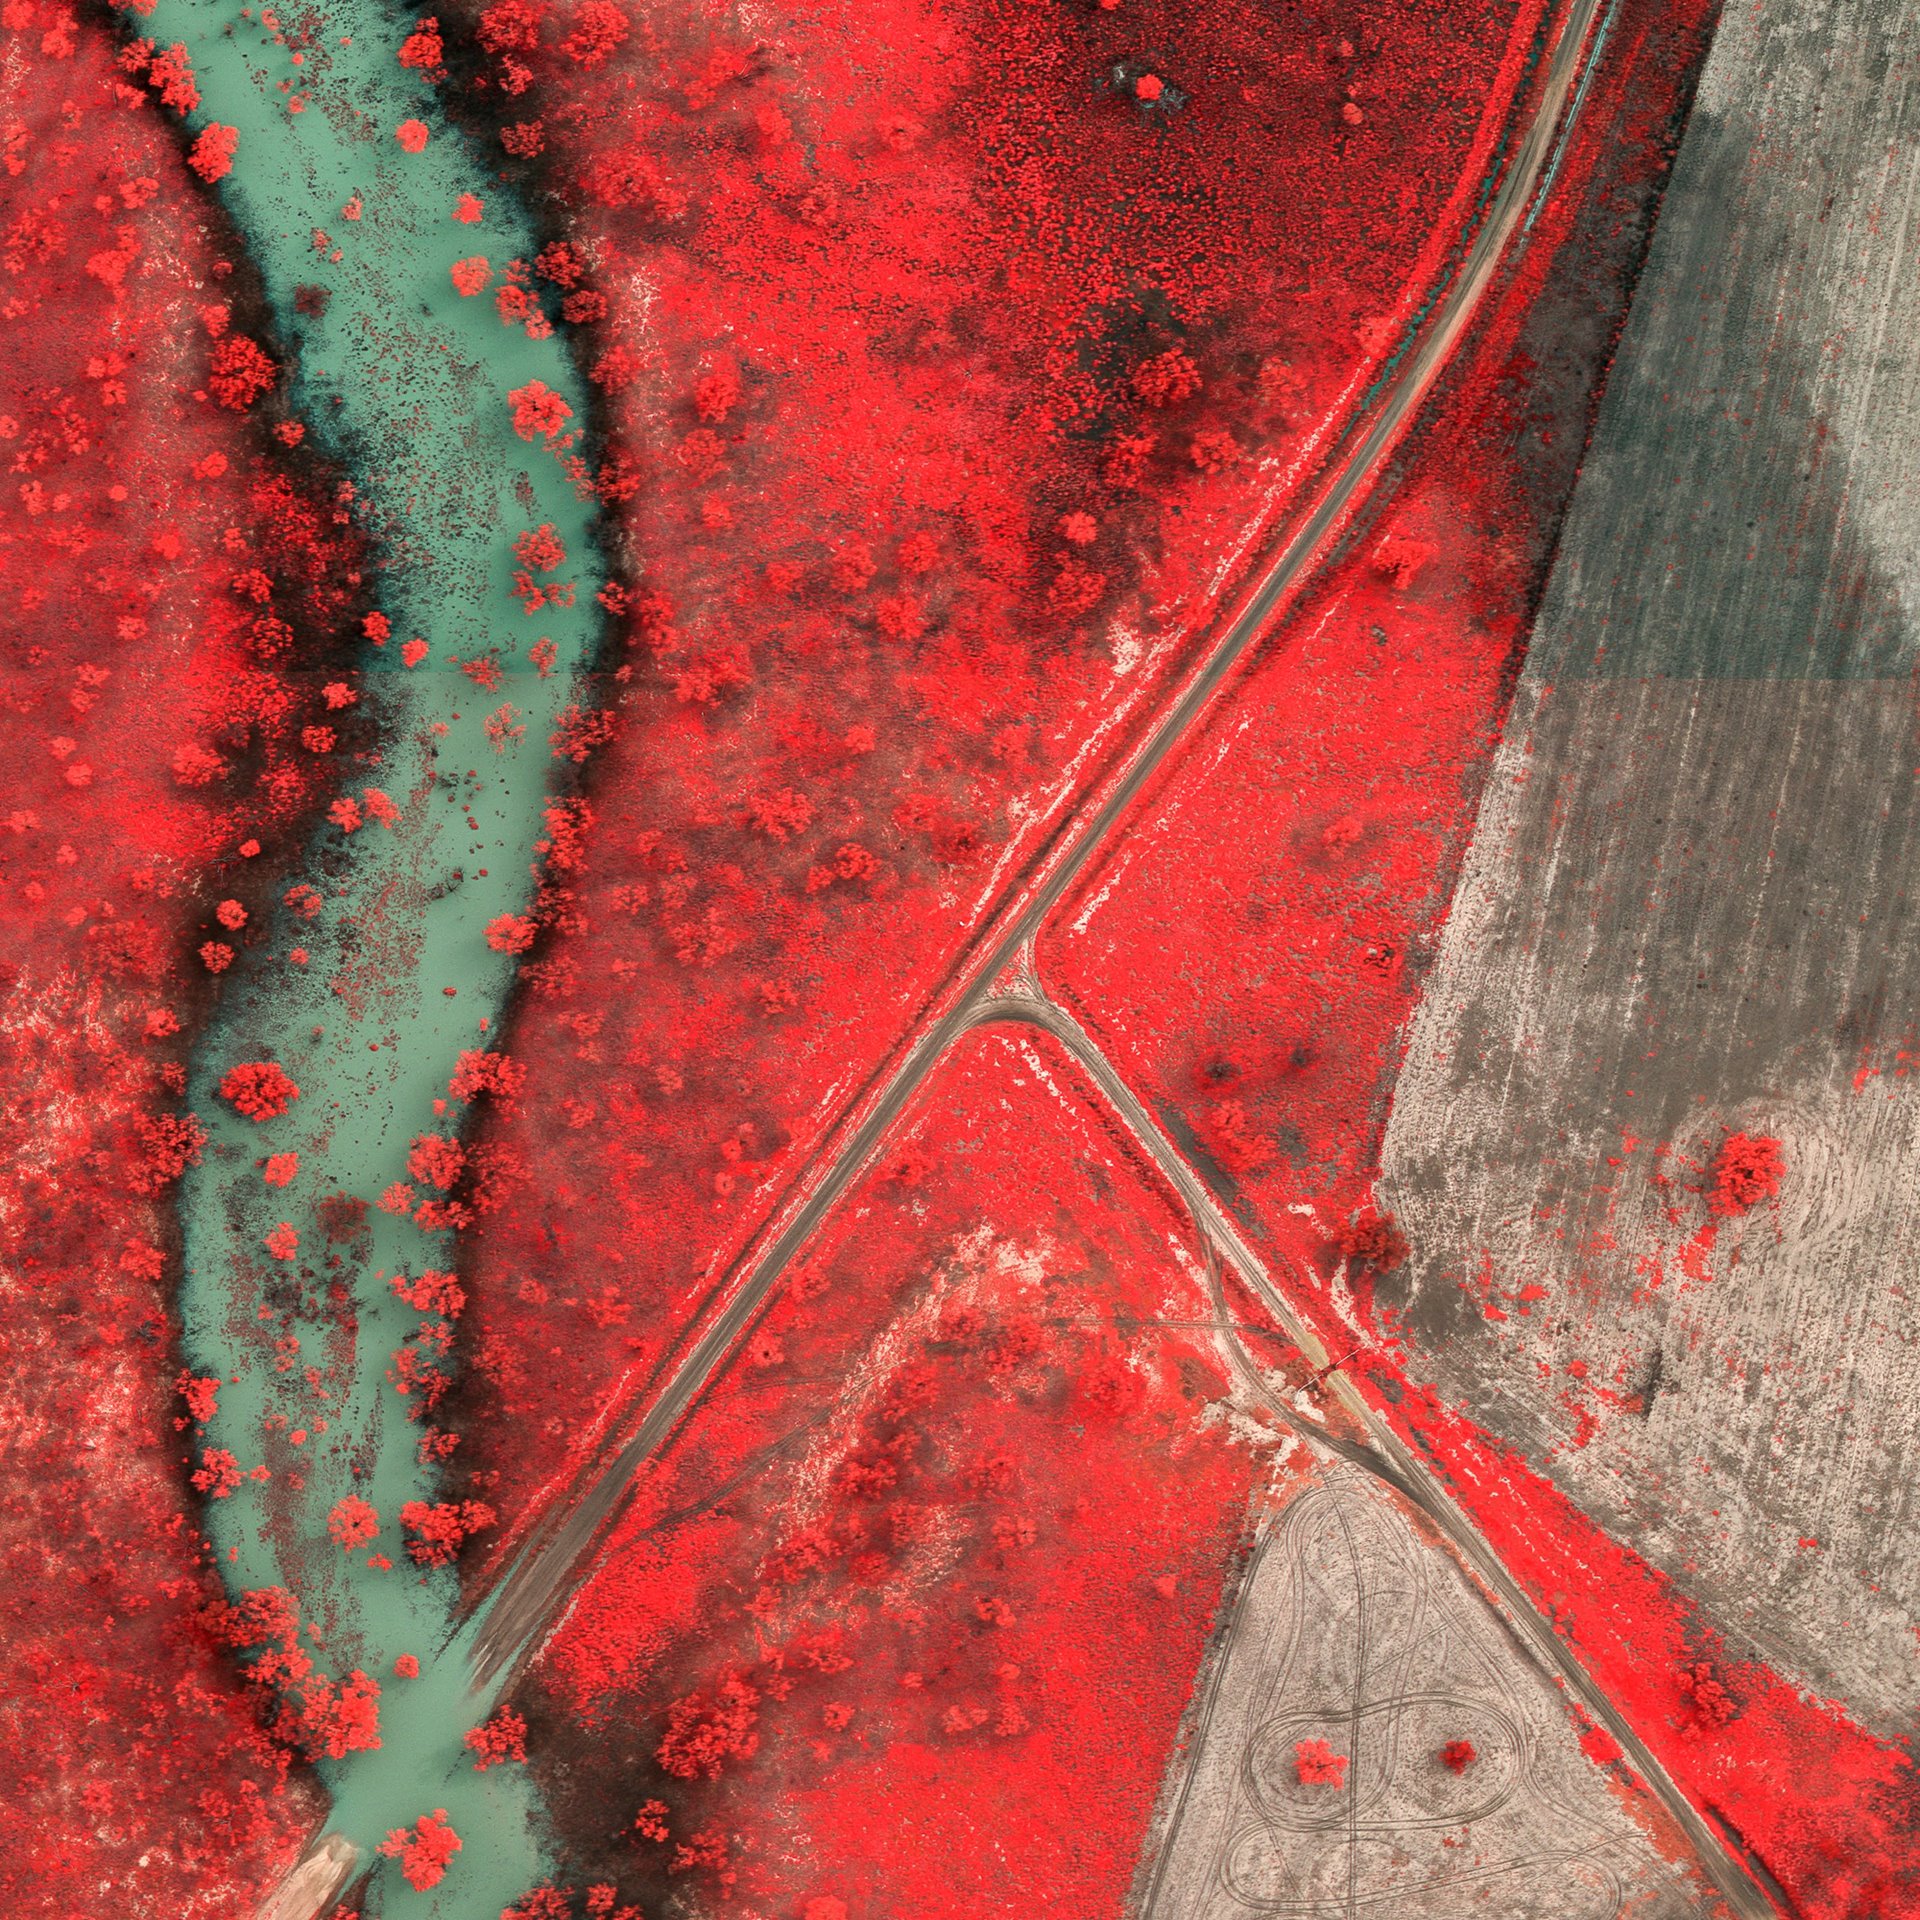 <p>Image of a junction in Mogil Mogil, New South Wales, Australia. Emergency response agencies utilize infrared aerial imagery to rapidly determine the extent of damage and can also determine safe ingress routes for response teams.</p>
